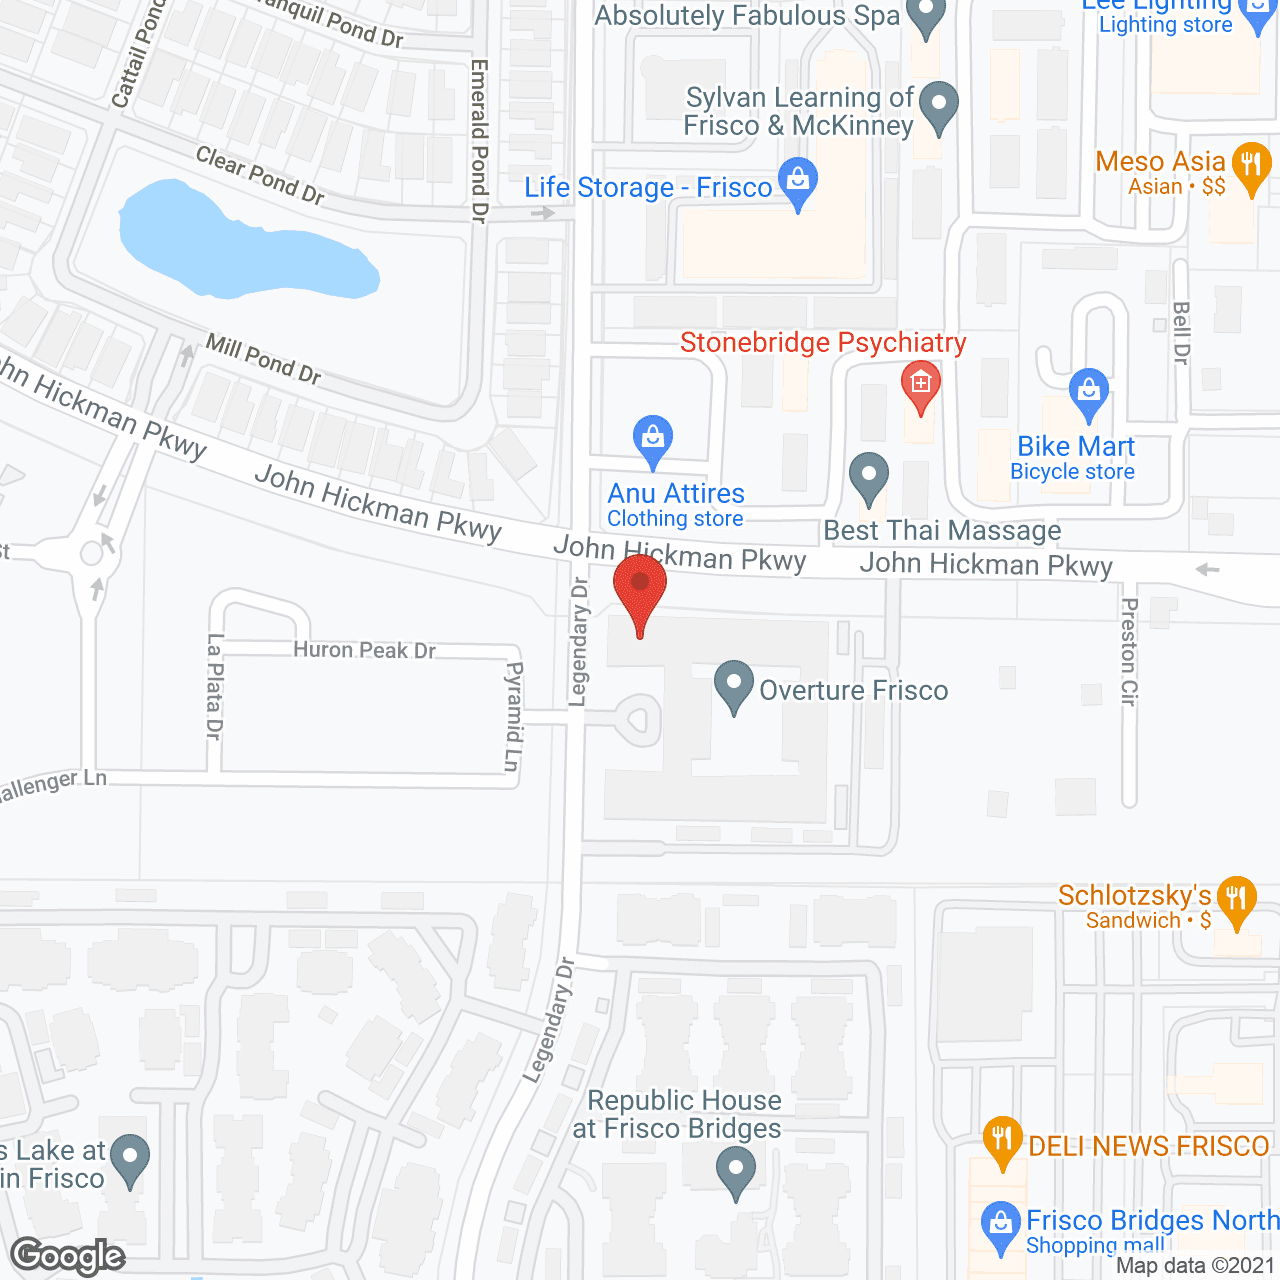 Overture Frisco in google map